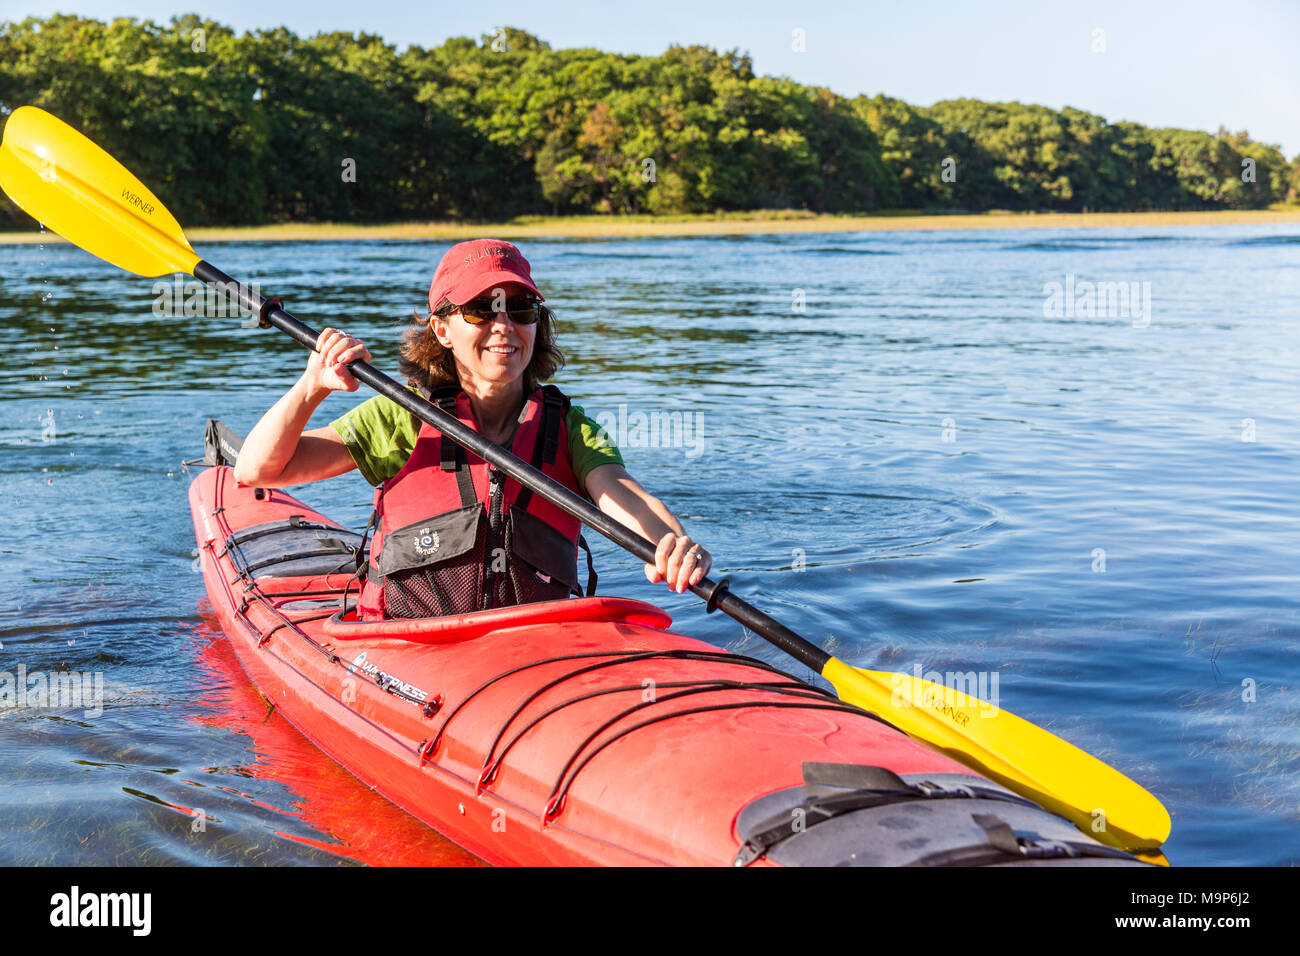 Woman in kayak on Essex River at Cox Reservation in Essex, Massachusetts Stock Photo